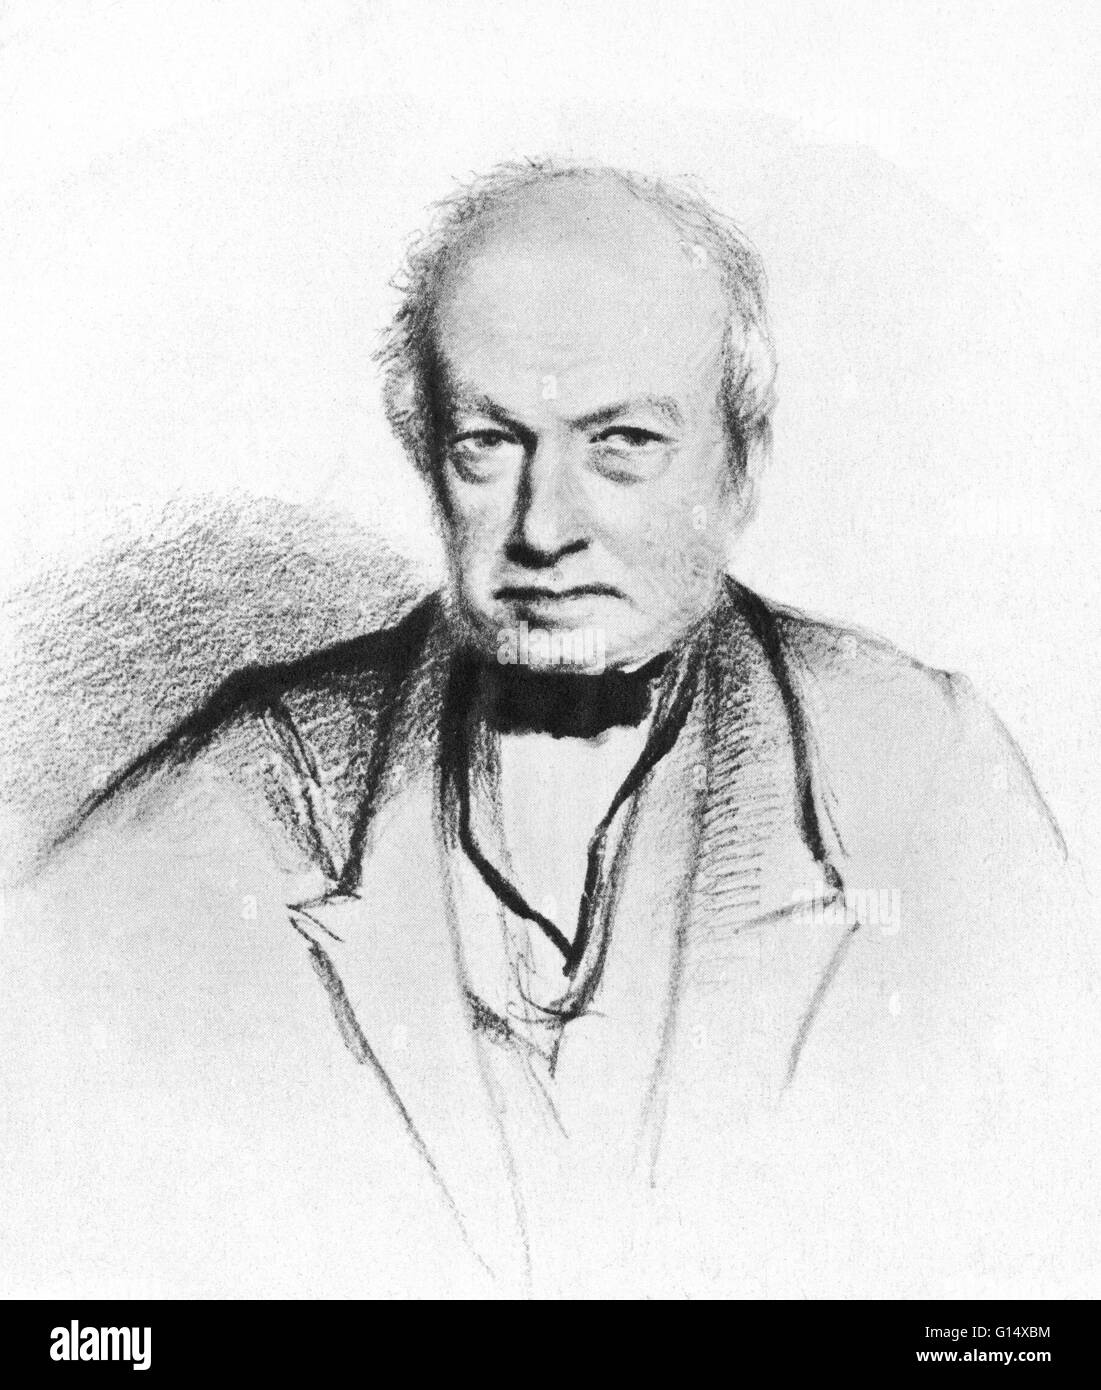 Robert Brown (December 21, 1773 - June 10, 1858) was a Scottish botanist and paleobotanist who made important contributions to botany largely through his pioneering use of the microscope. He enrolled to study medicine at the University of Edinburgh, but d Stock Photo